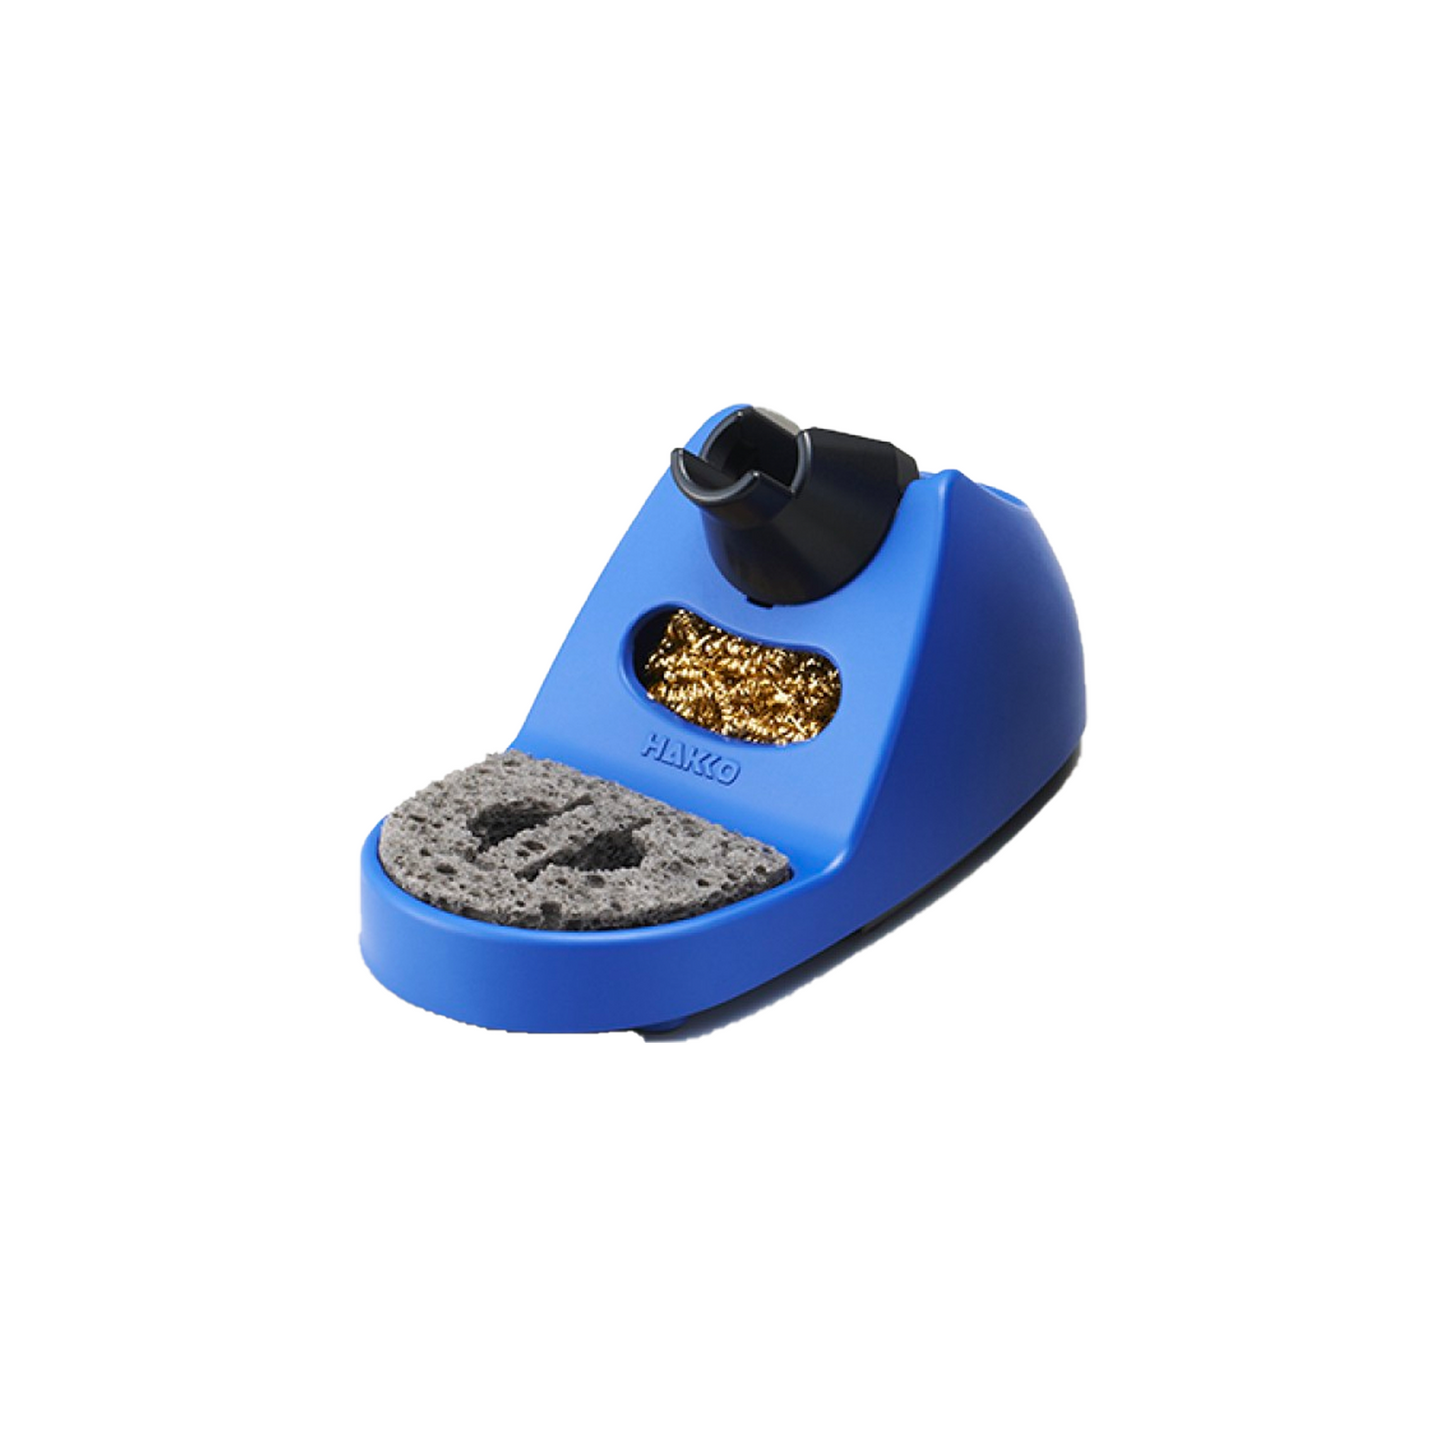 Hakko Products_ FH800-81BY Iron Holder_ Iron Holder/Stand_ Hakko Products